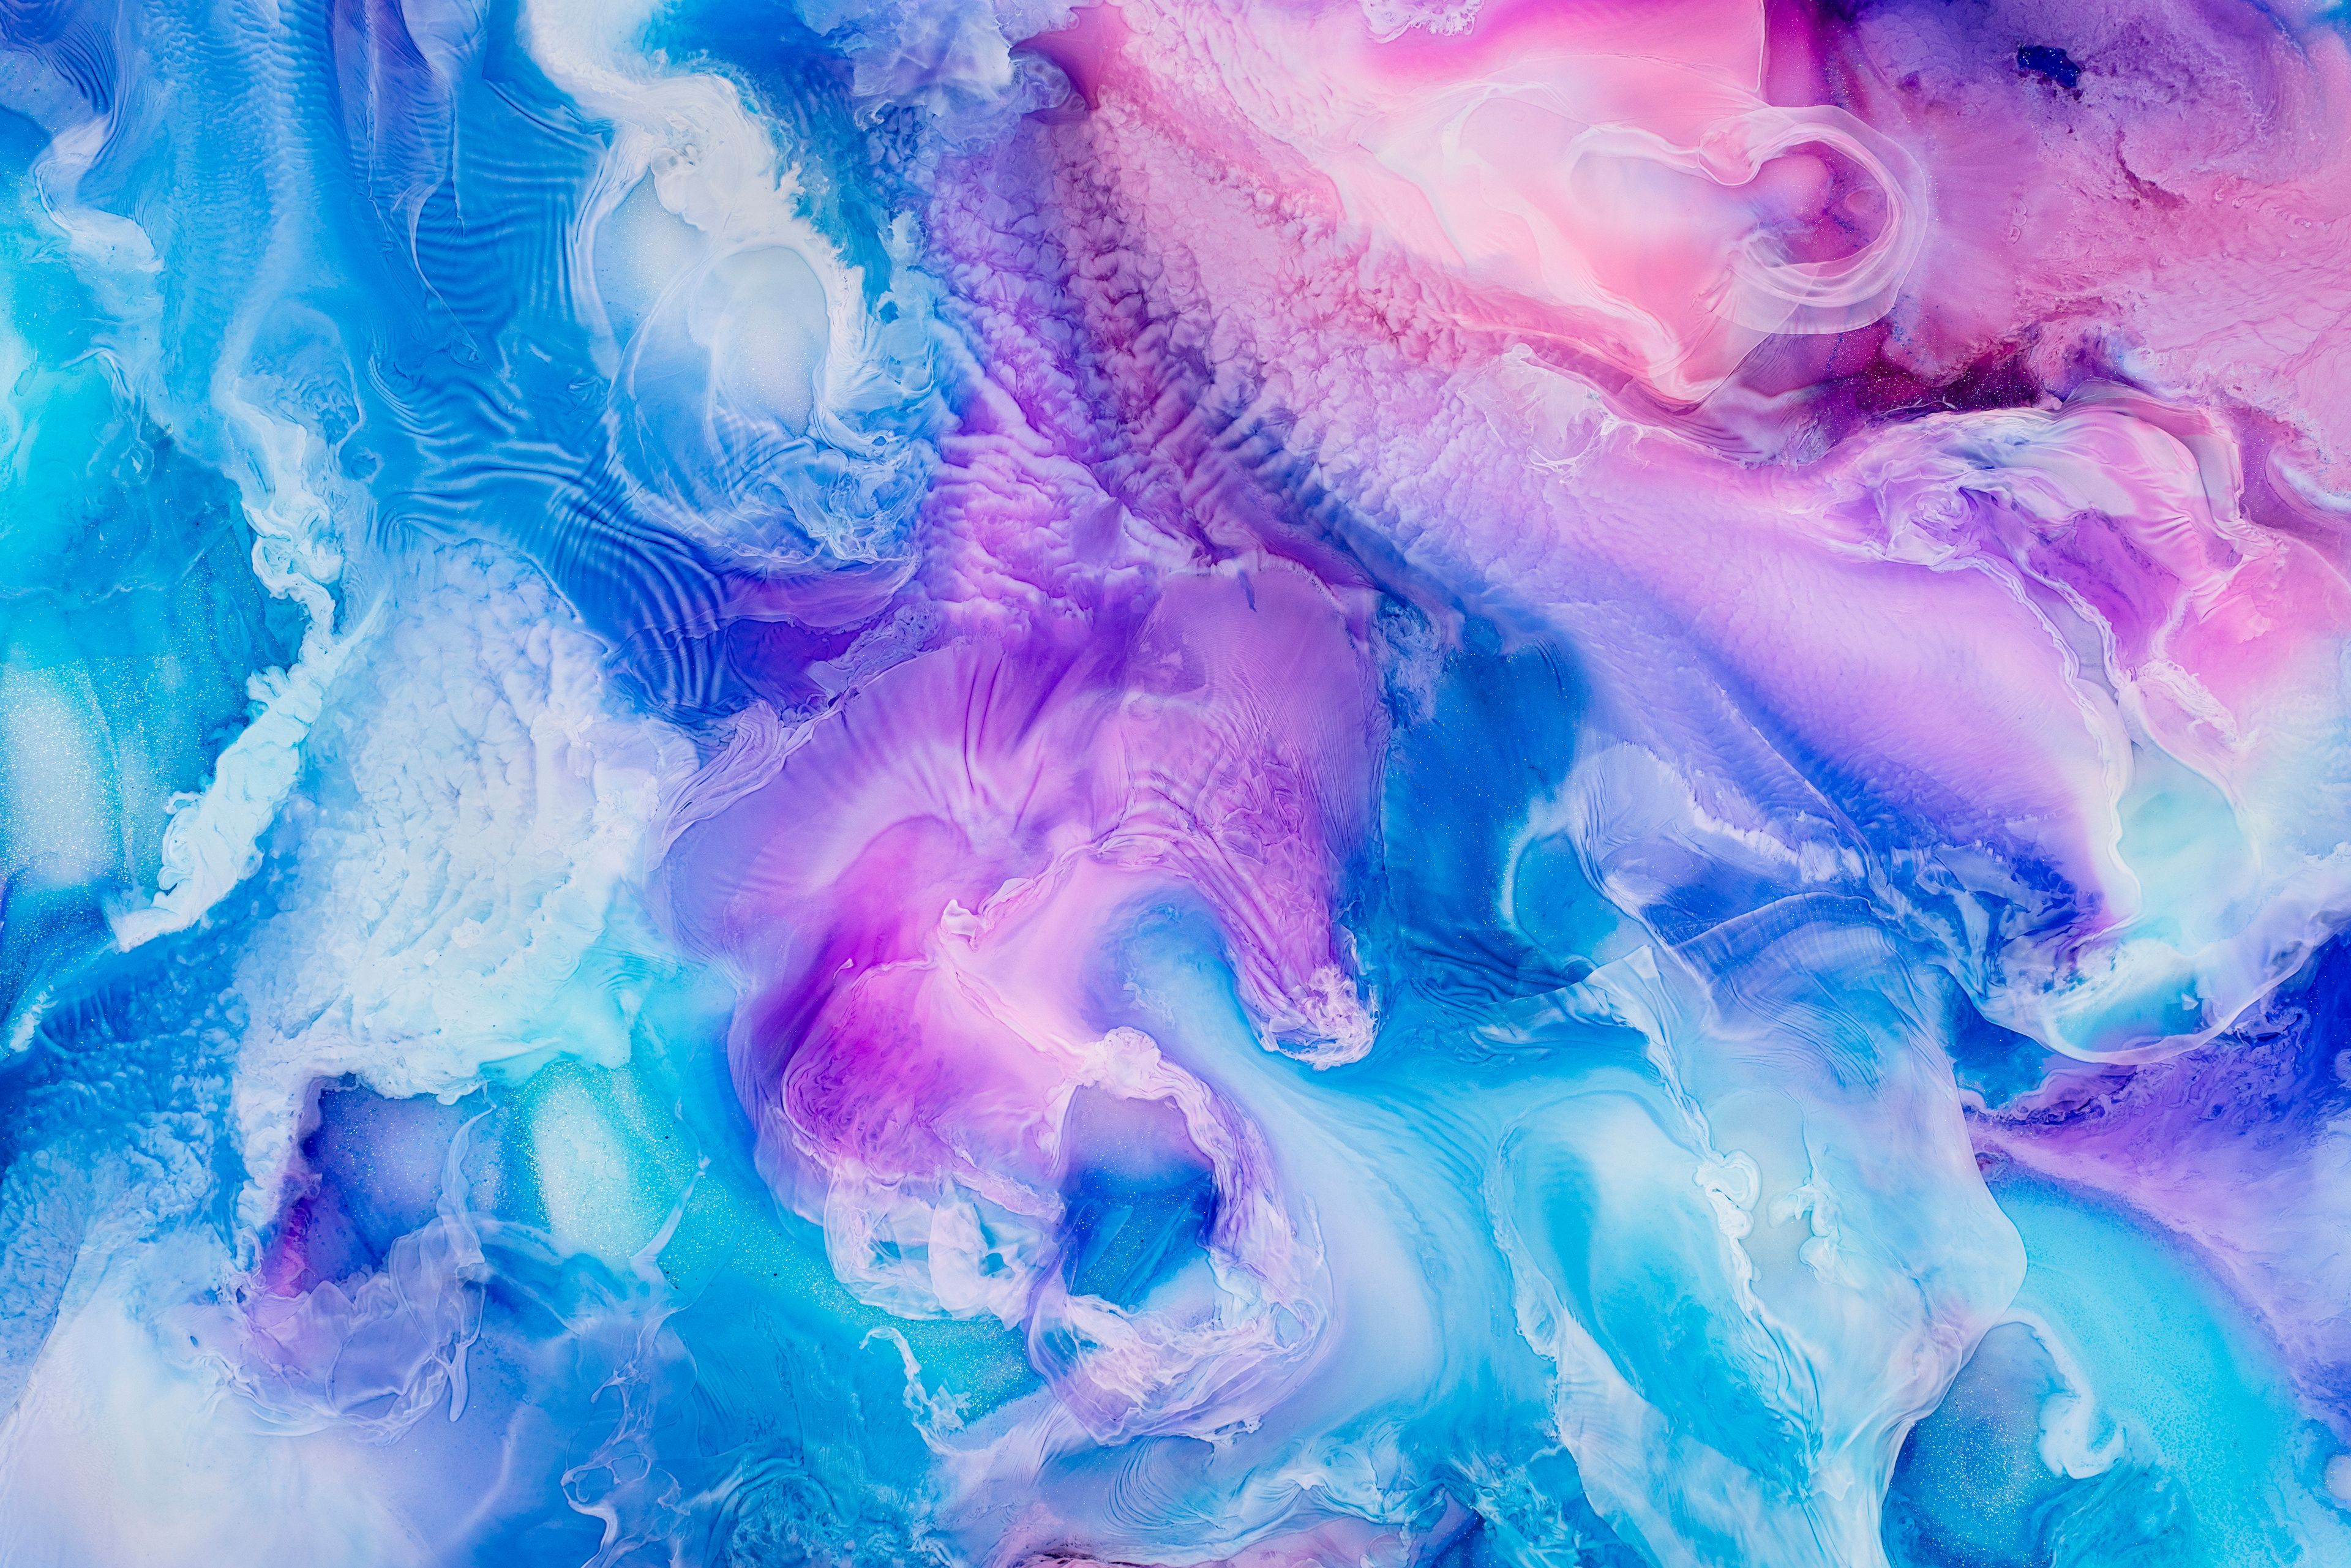 Liquid art 4K Wallpaper, Pearl ink, Colorful, Fluid, Background, Aesthetic, Abstract